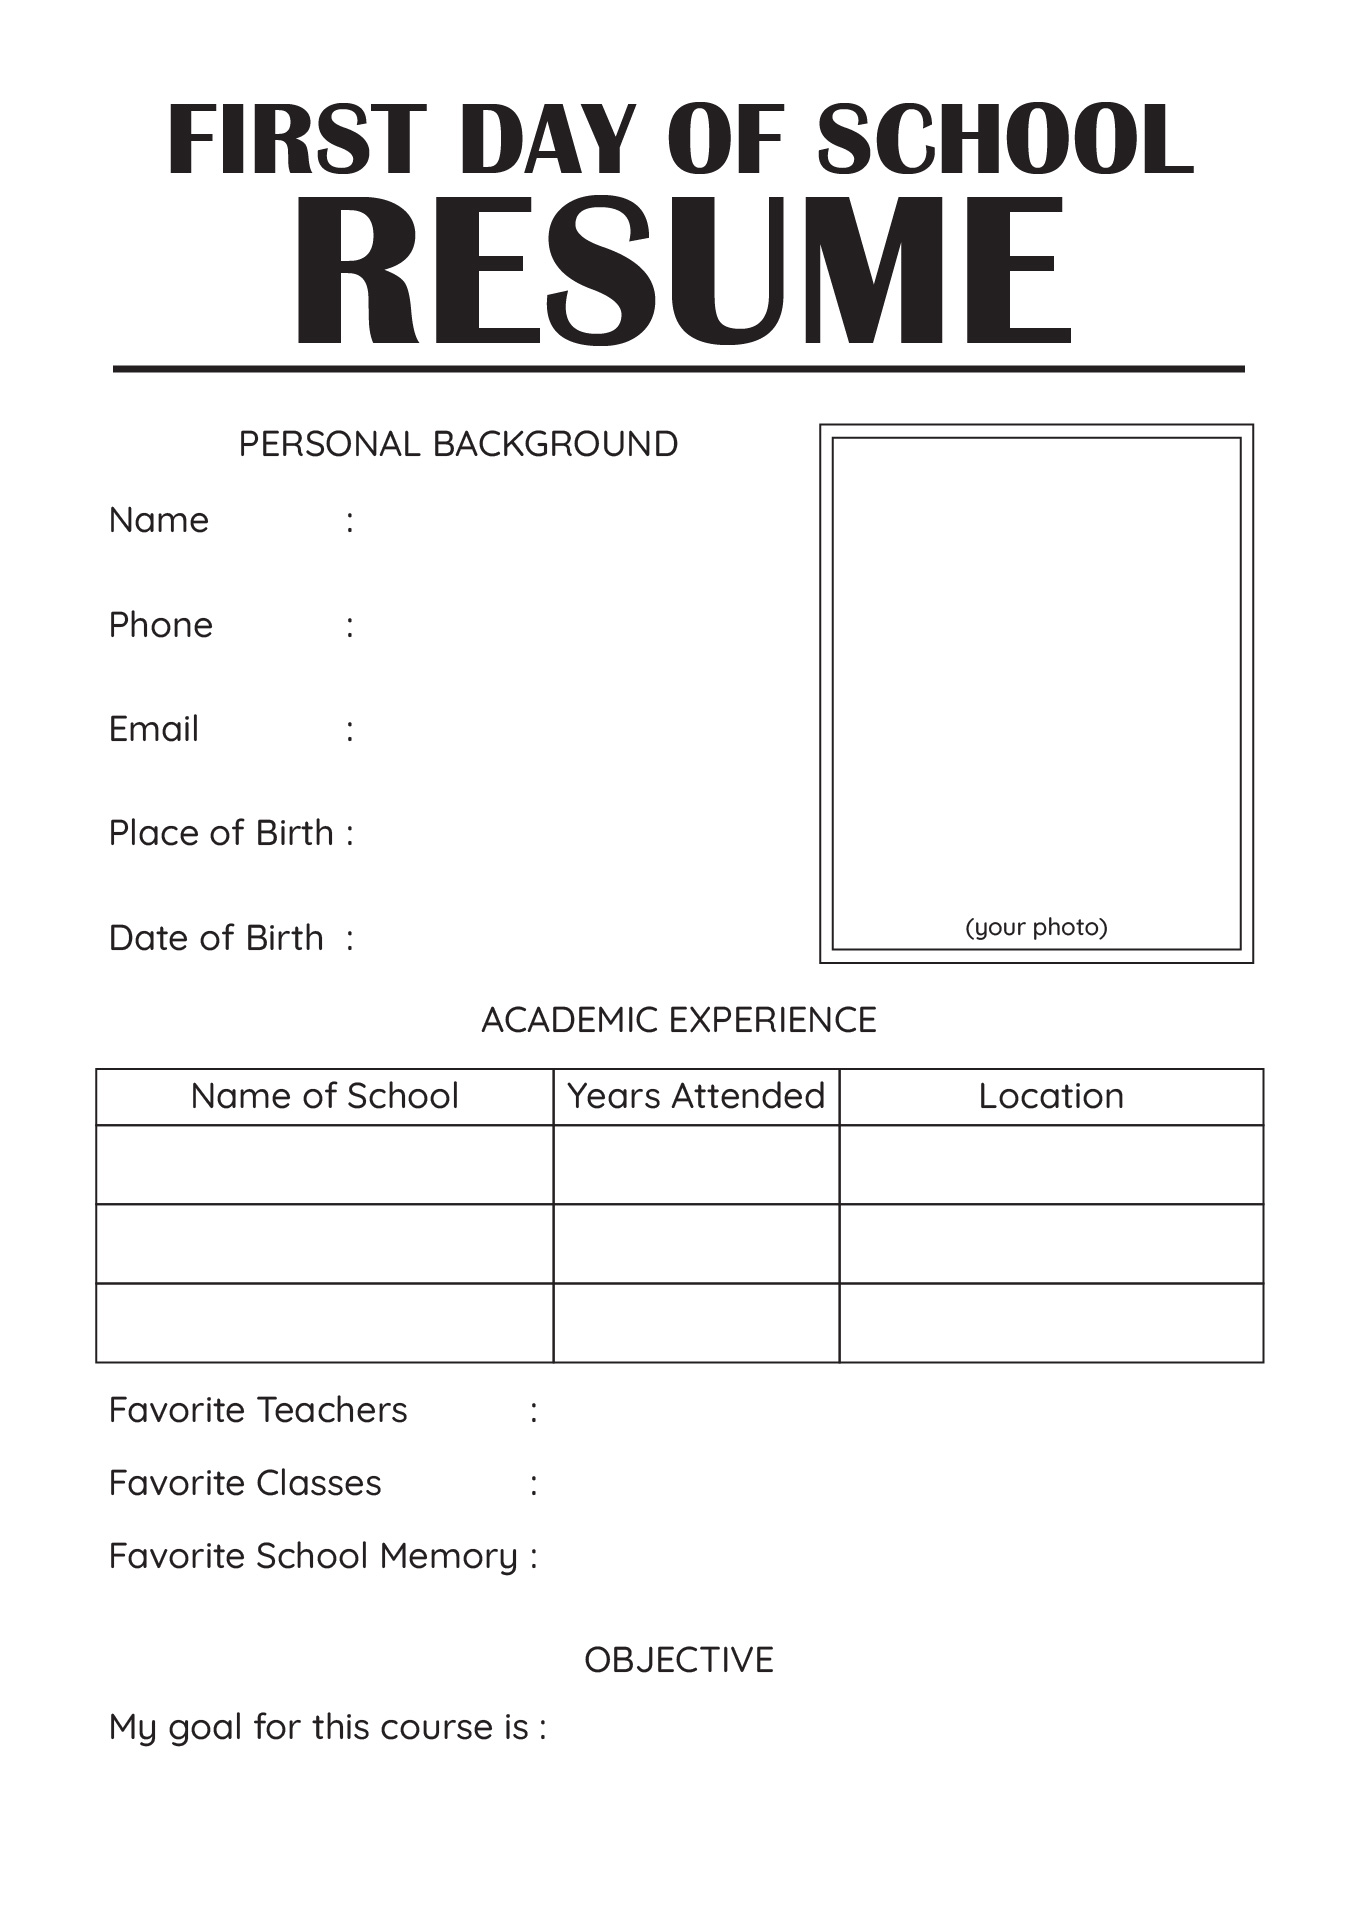 First Day of School Student Resume